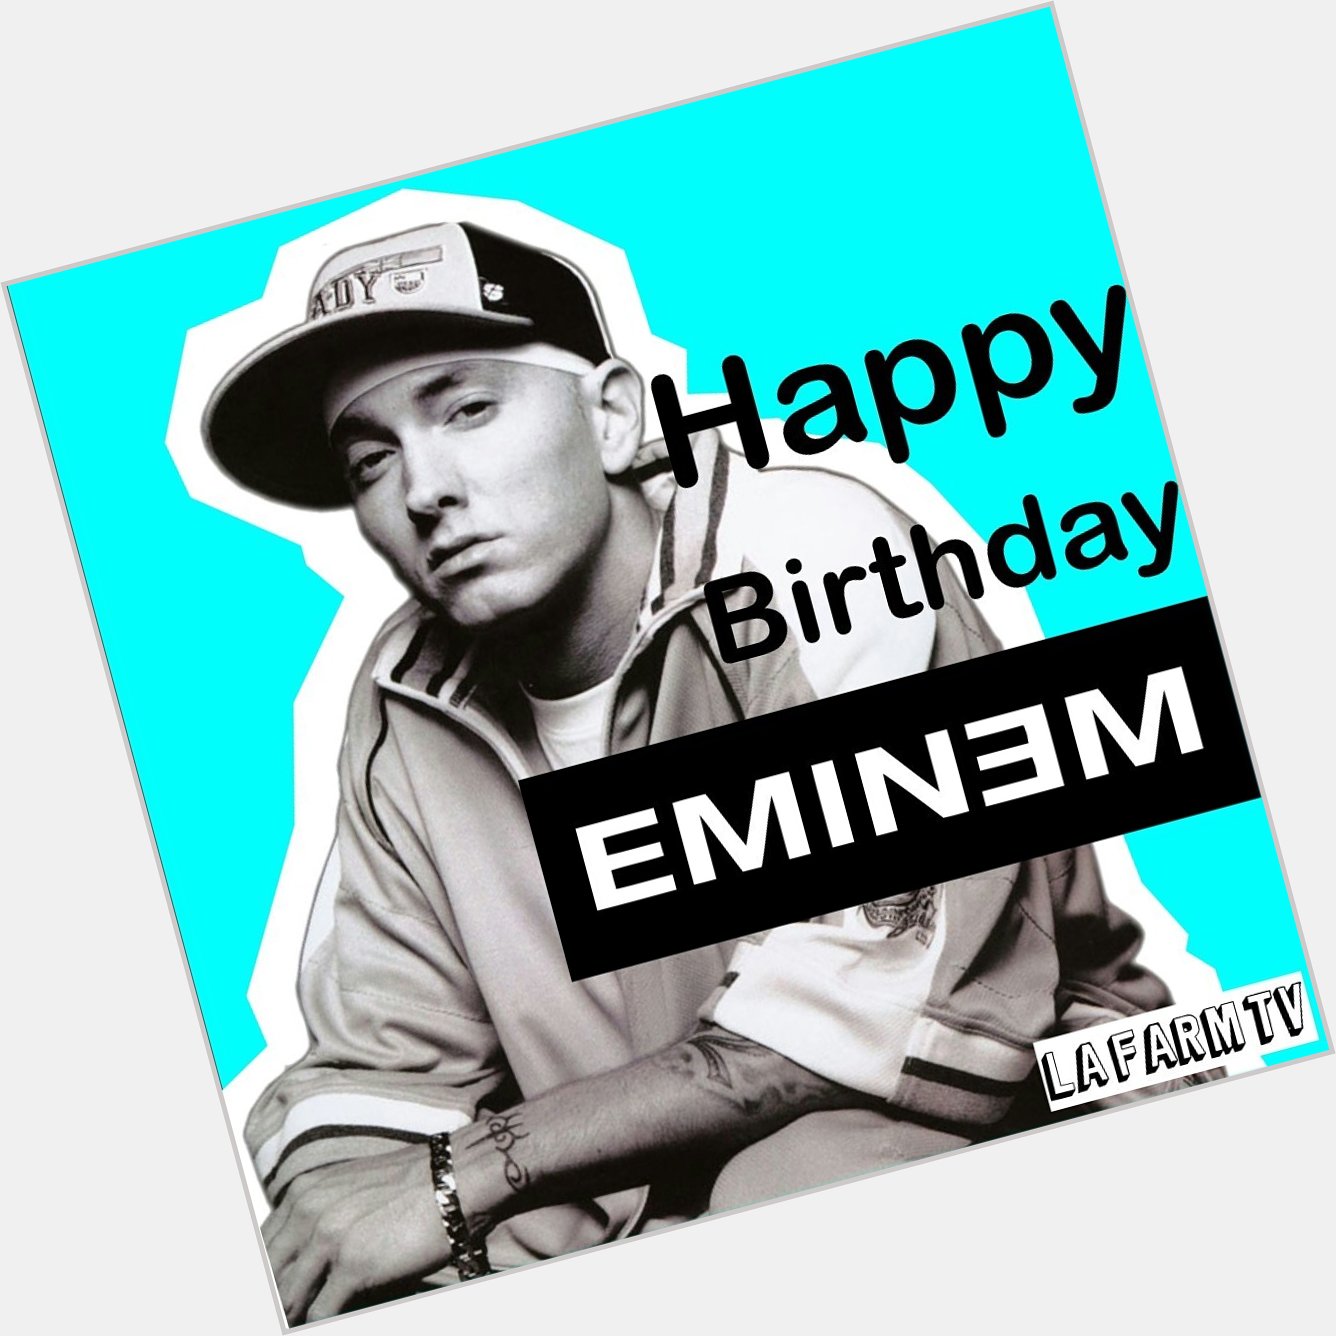 Happy 45th Birthday to our favorite Slim Shady!   